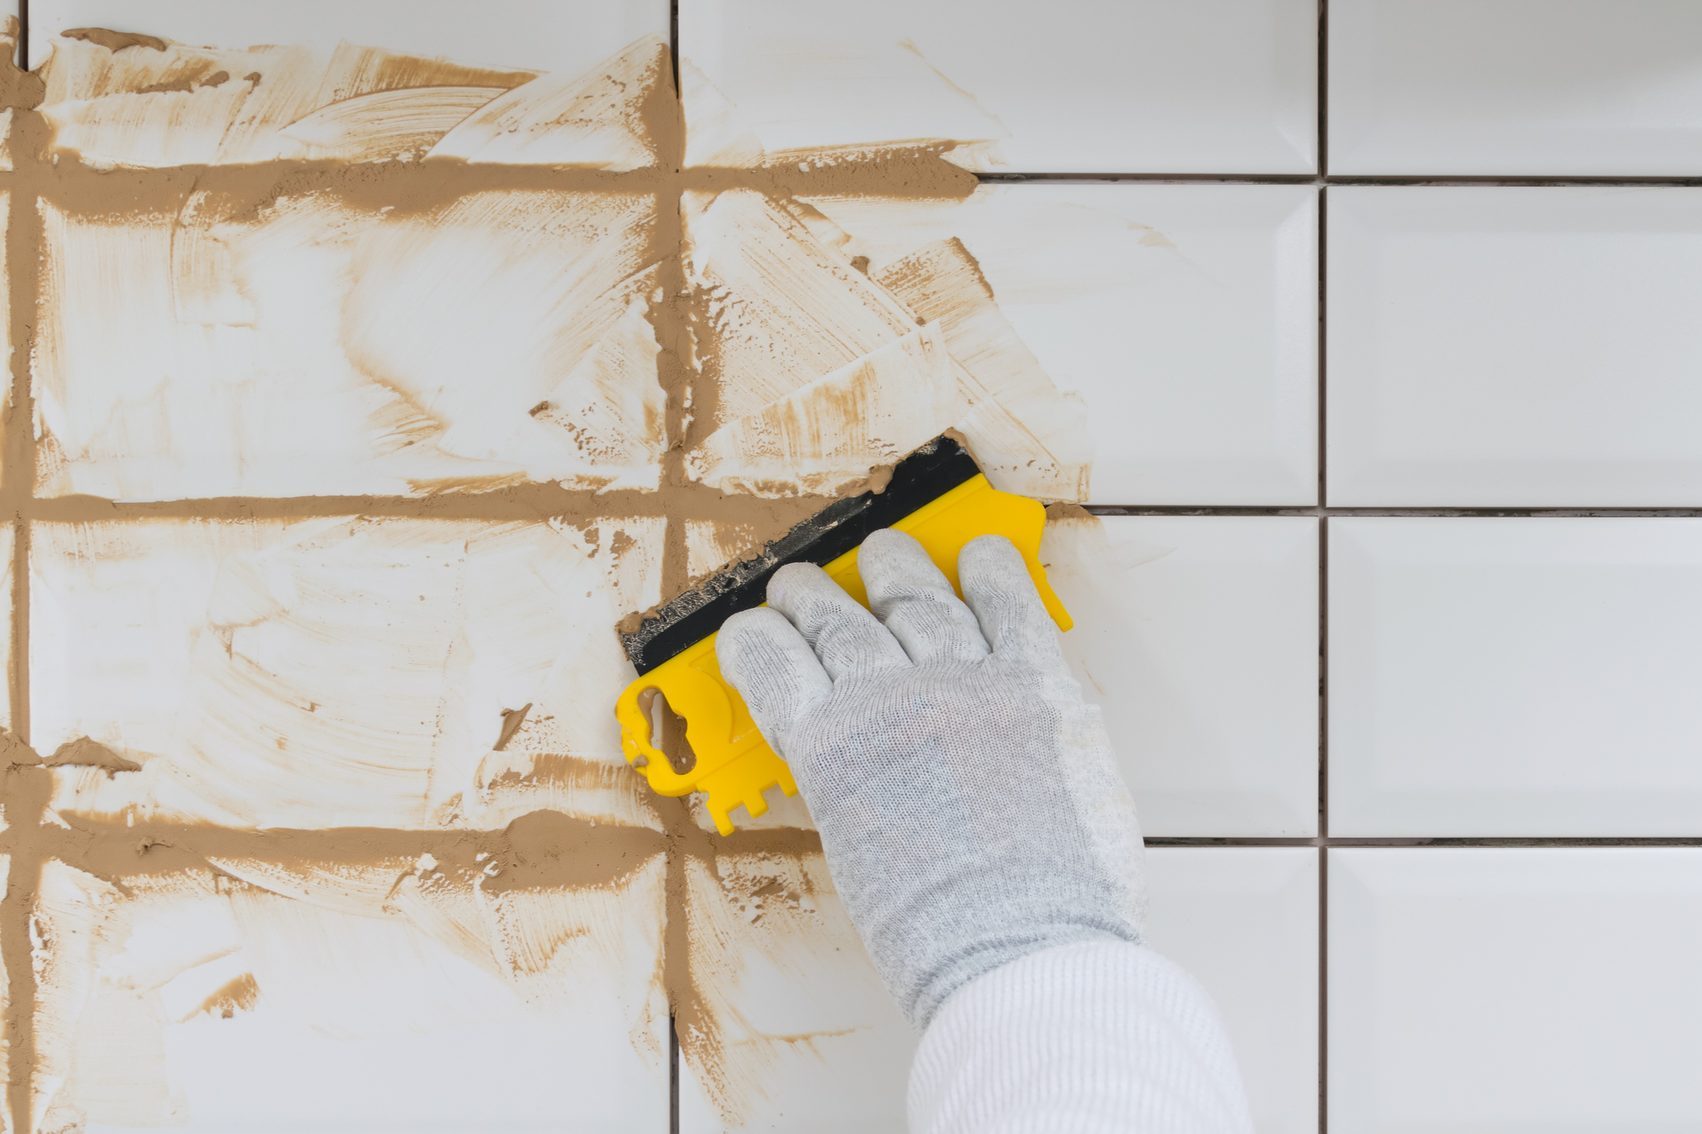 close-up of a hand in a protective glove holding a yellow spatula, in the process of brown grout on white tiles